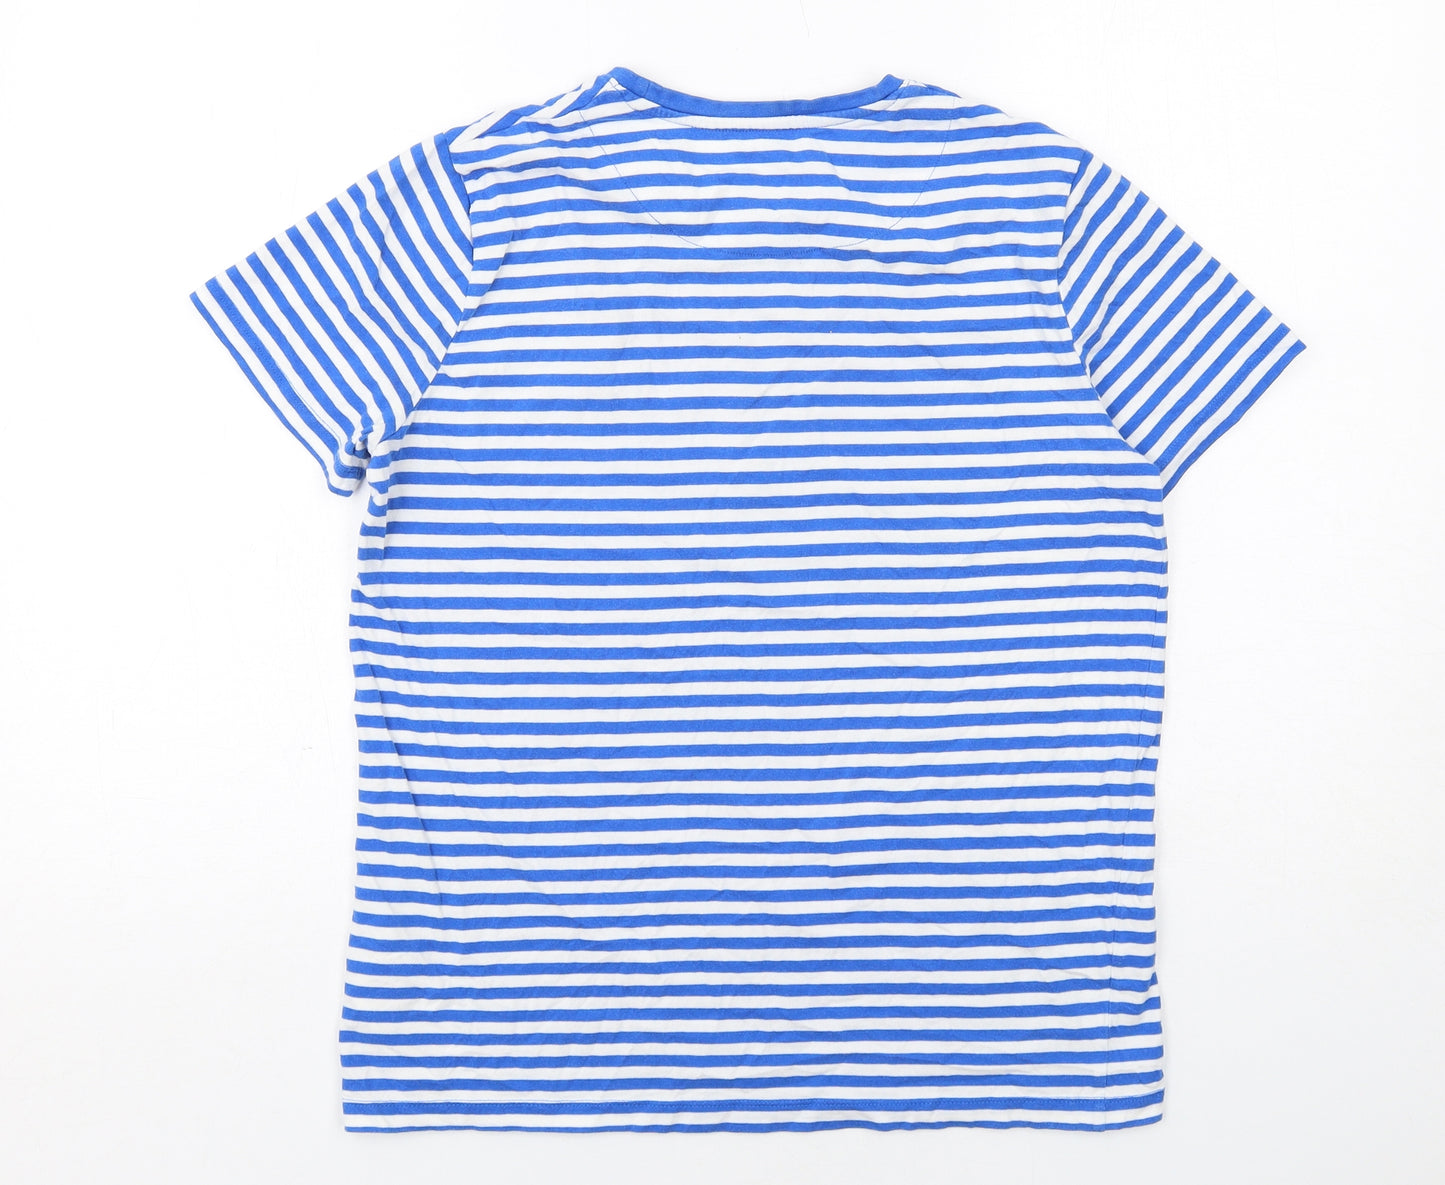 US Polo Assn. Boys Blue Striped Cotton Basic T-Shirt Size 14-15 Years Crew Neck Pullover